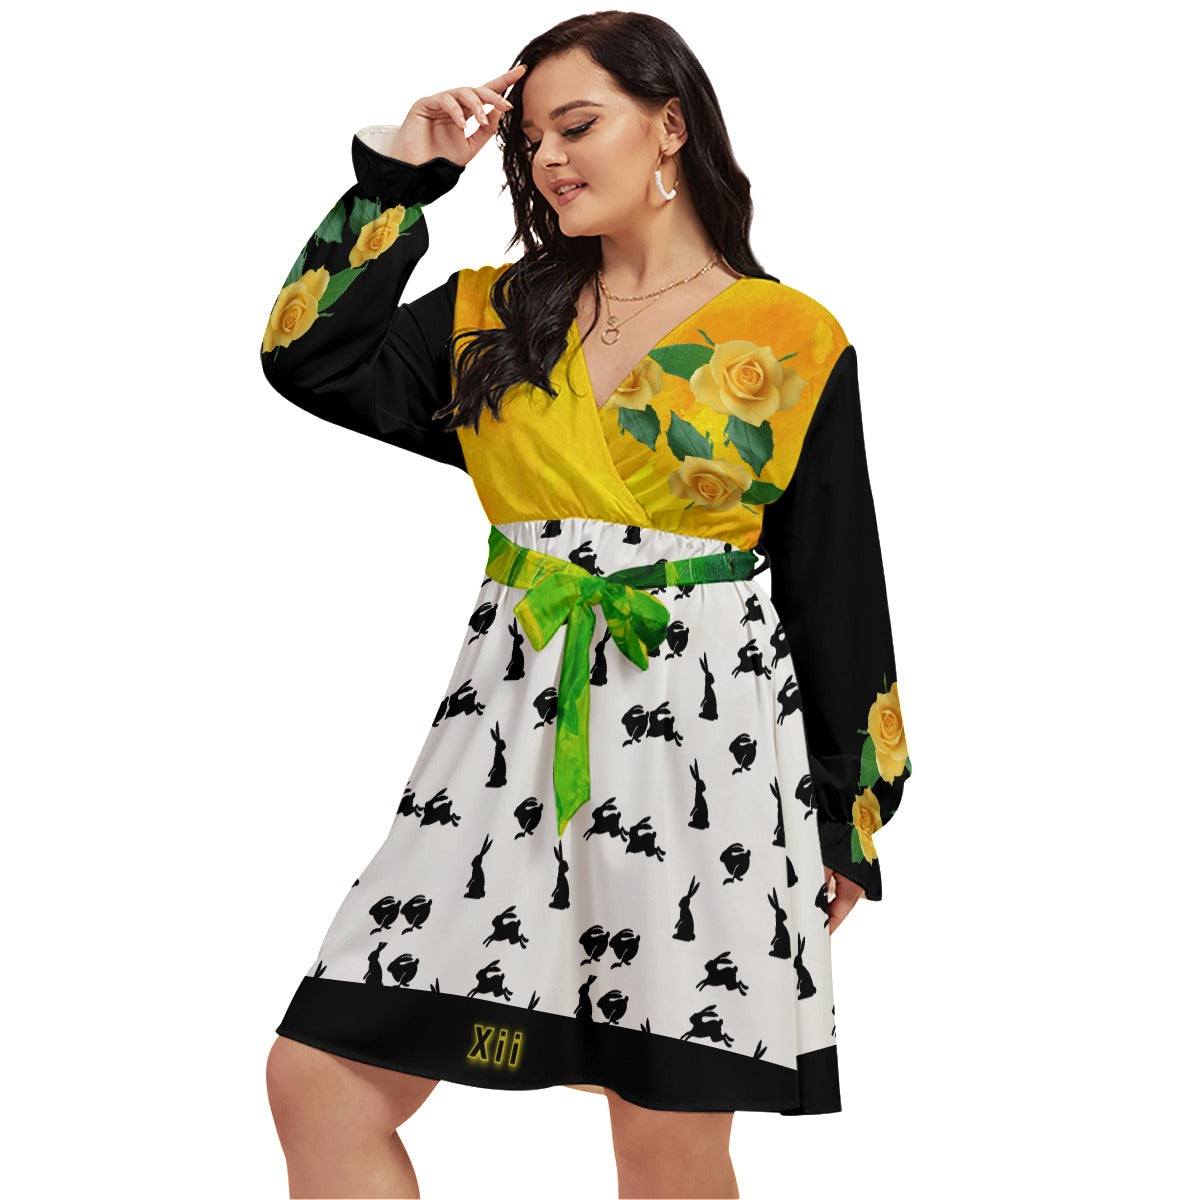 Xcarii Xii - Yellow Bunny dress (For Plus Size Queens